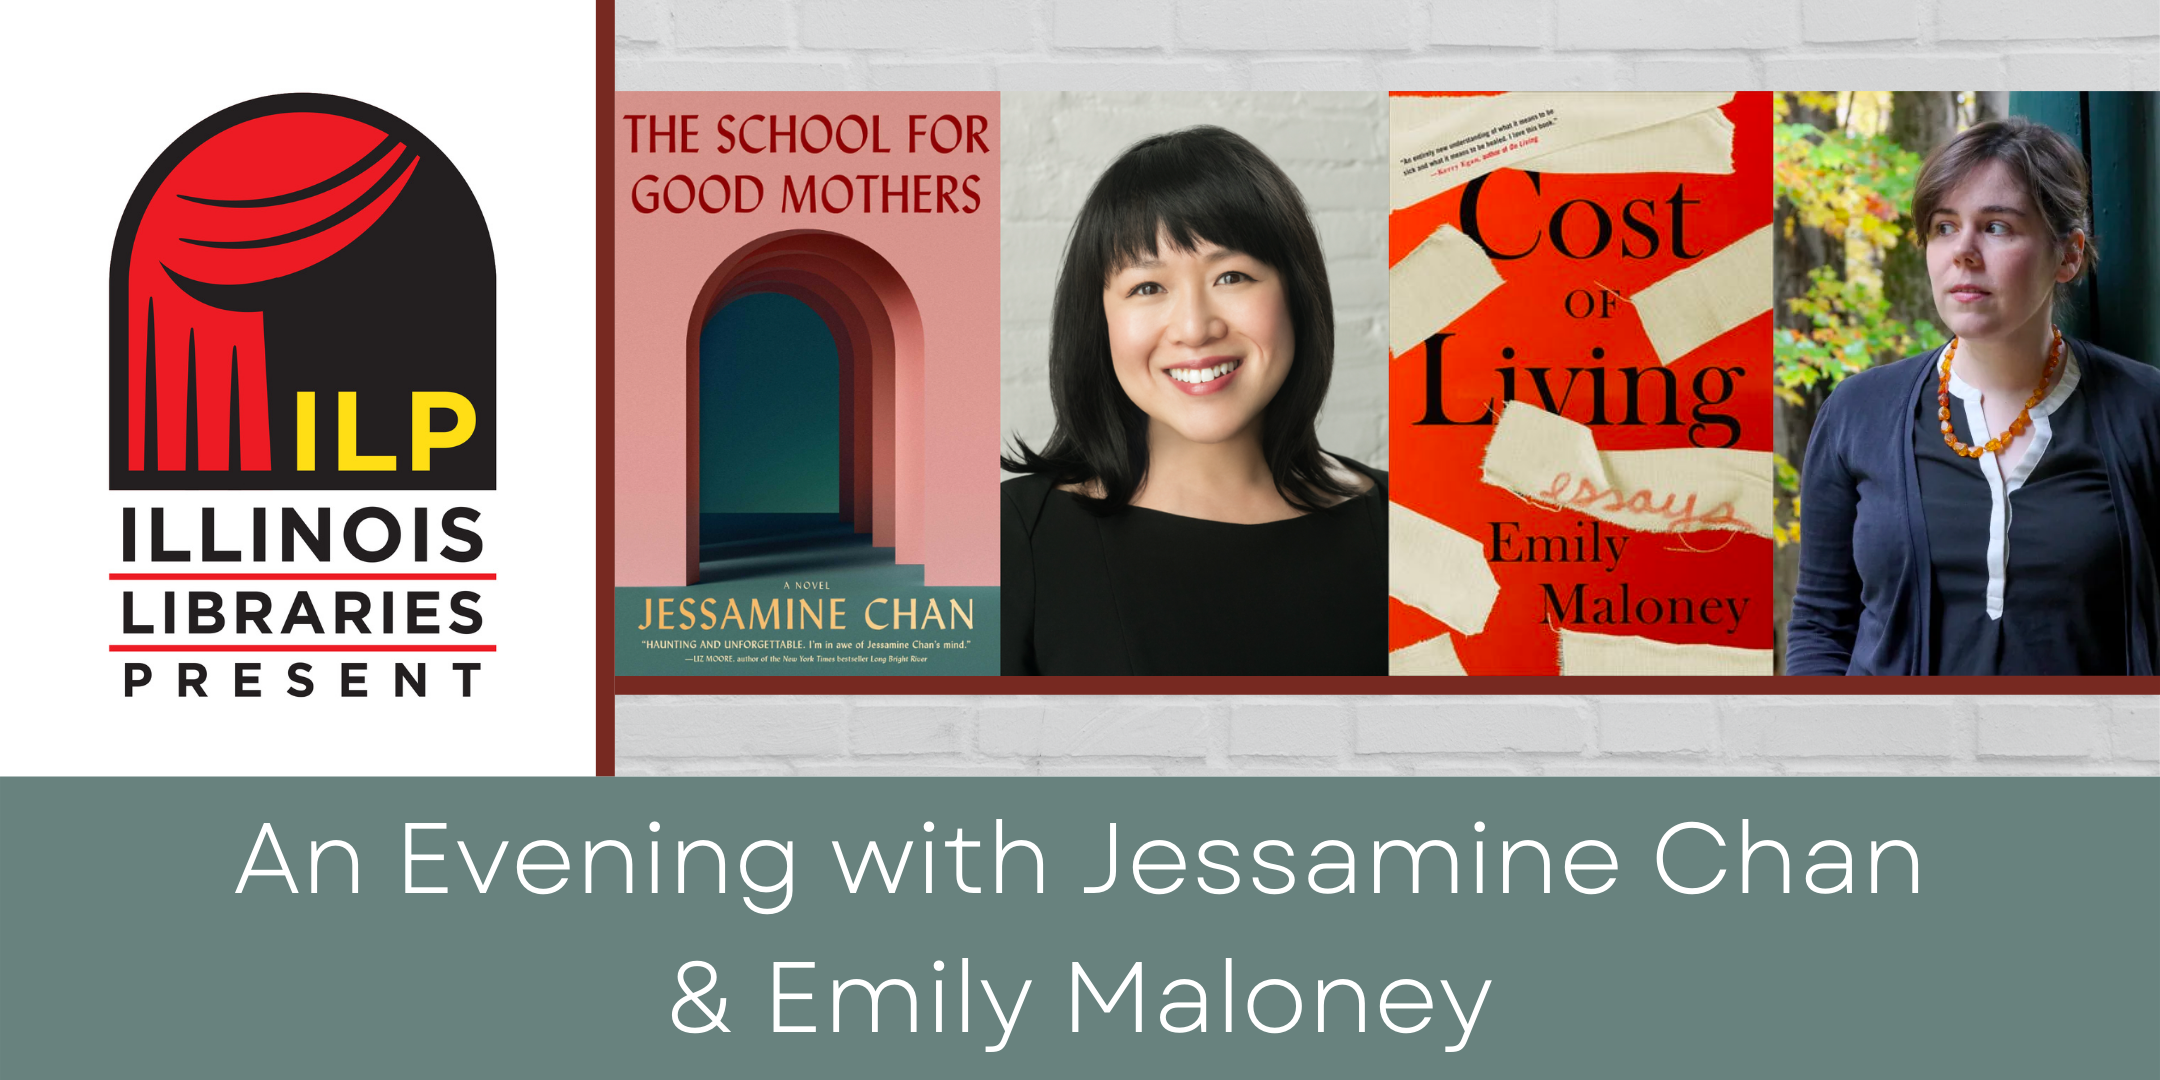 Illinois Libraries Present: An Evening withAn Evening with Jessamine Chan & Emily Maloney  event image with author and book covers